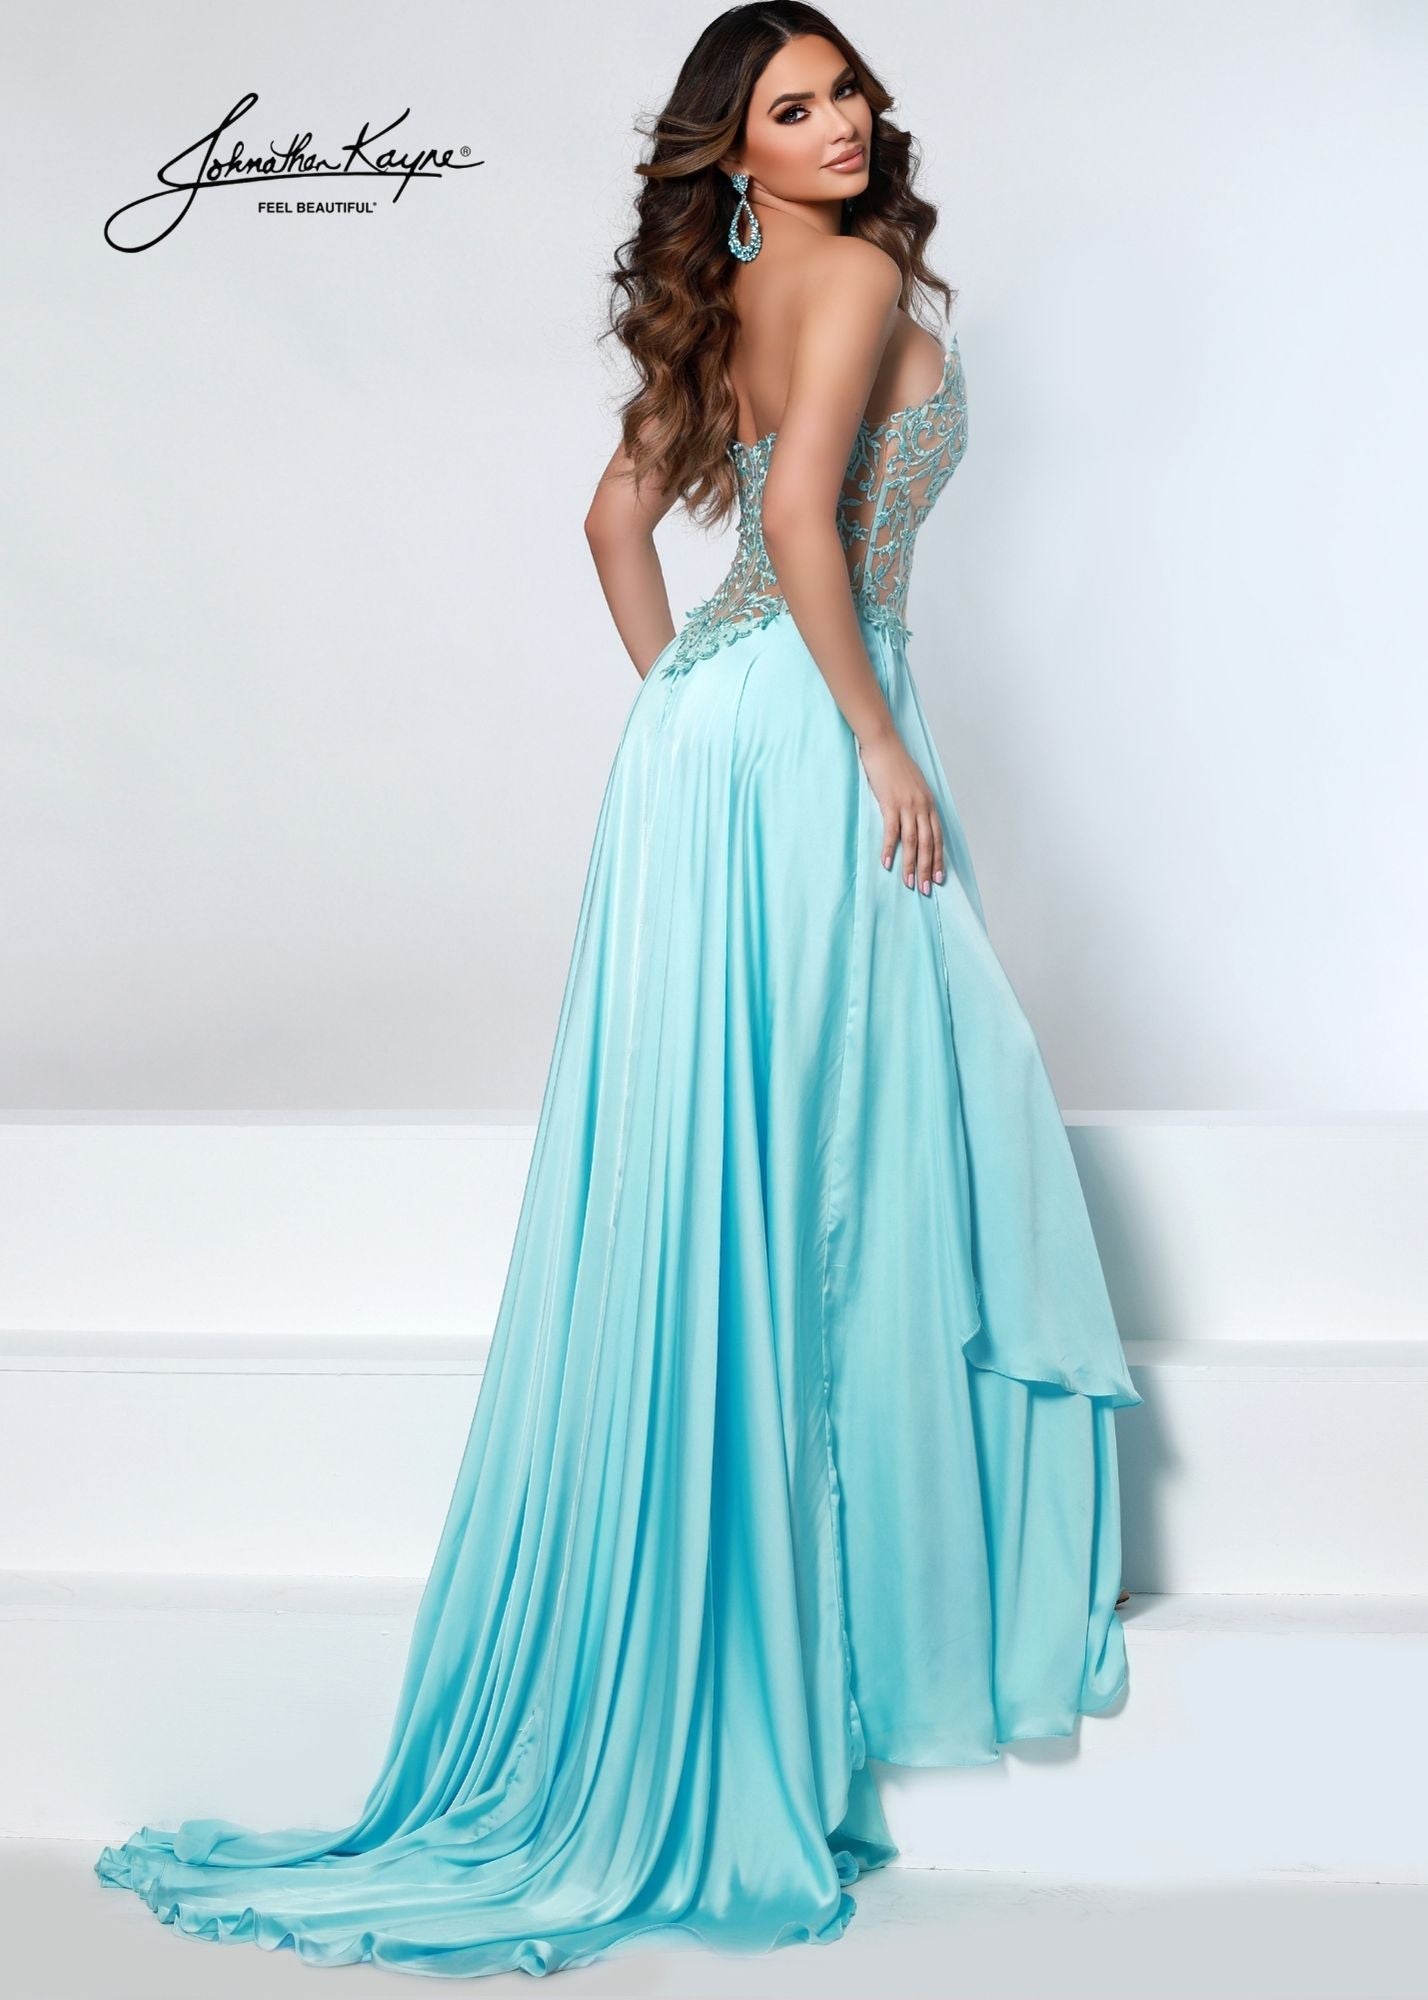 Johnathan Kayne Dress 2554 This pageant gown has a sheer embellished lace bodice with an asymmetrical waistline and peaks for the v neckline. The long charmeuse skirt is layered and has a very long train.  It has detachable off the shoulder straps if you wish.  Prom, Pageant and Evening Dresses  